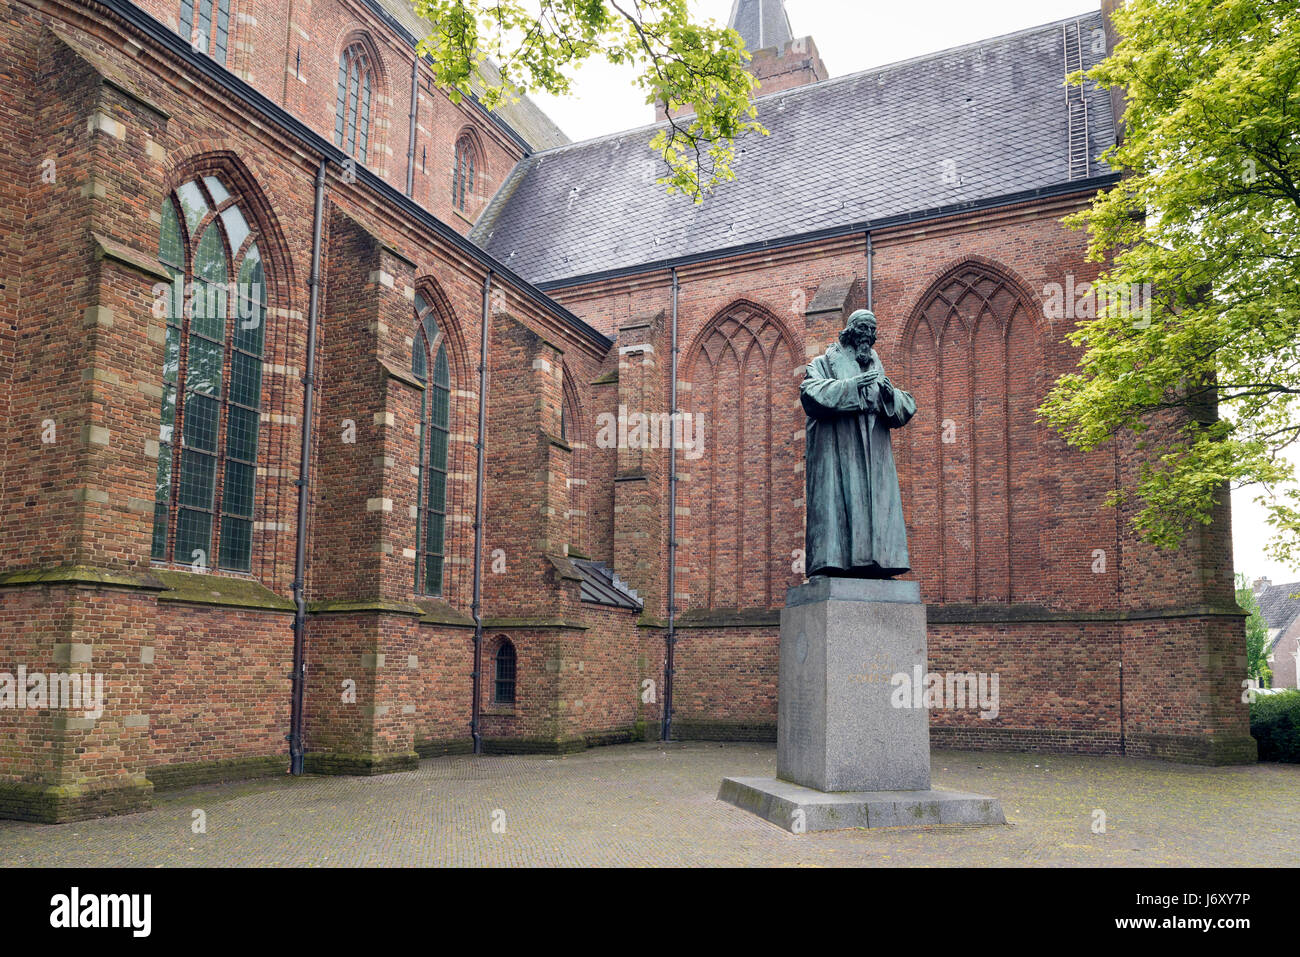 NAARDEN - NETHERLANDS - MAY 13, 2017: Statue of John Amos Comenius. Comenius was a Czech philosopher, pedagogue and theologian from the Margraviate of Stock Photo